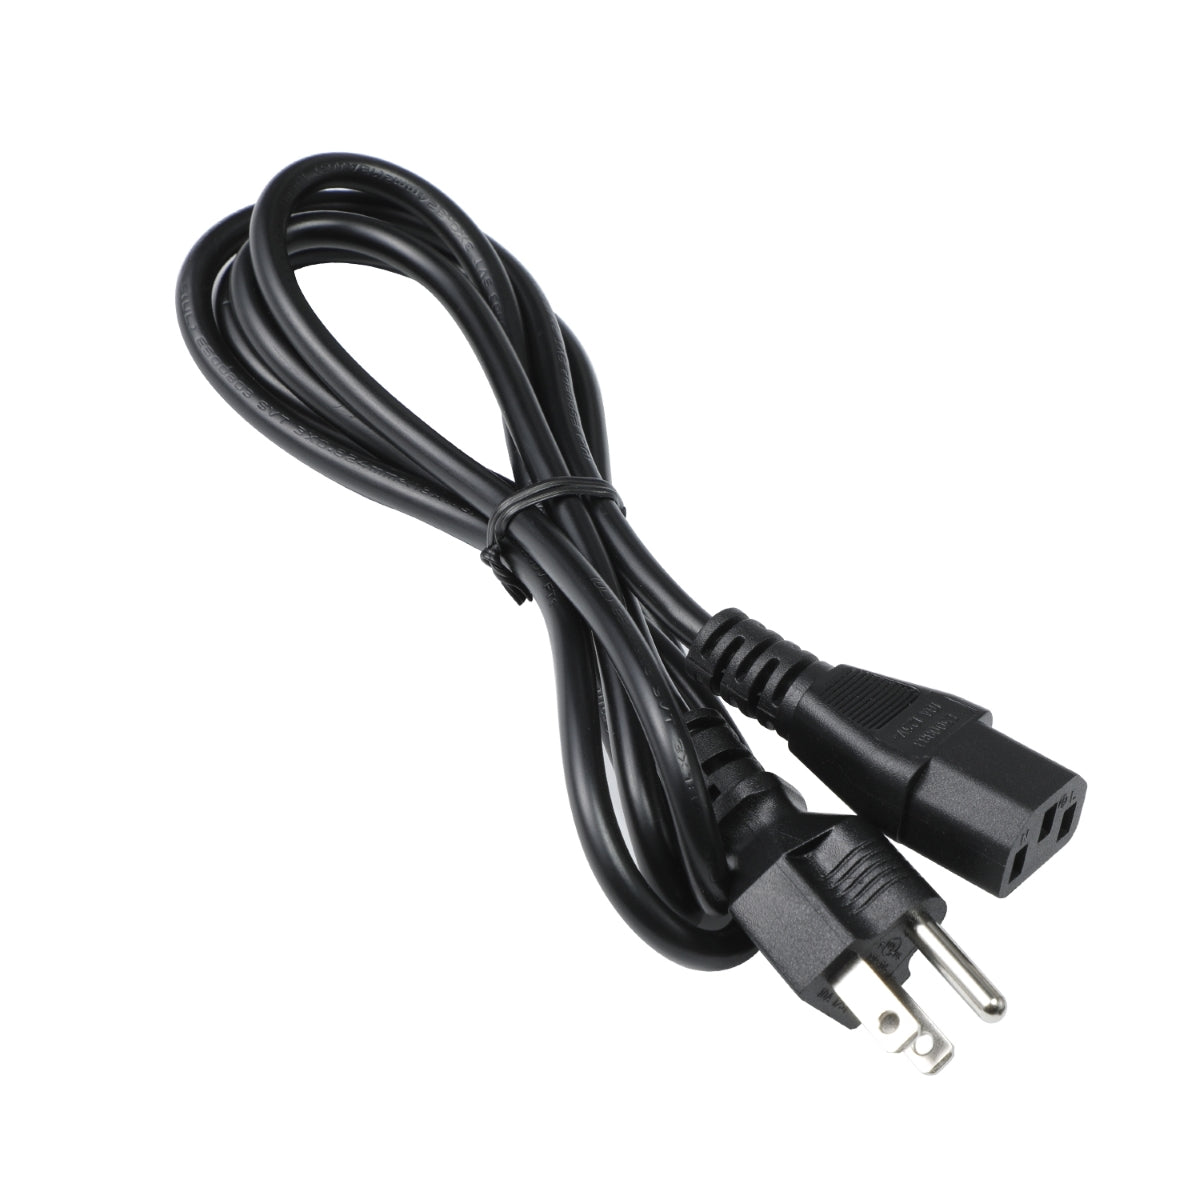 Power Cord for HP V320 32-inch (31.5-inch) Monitor